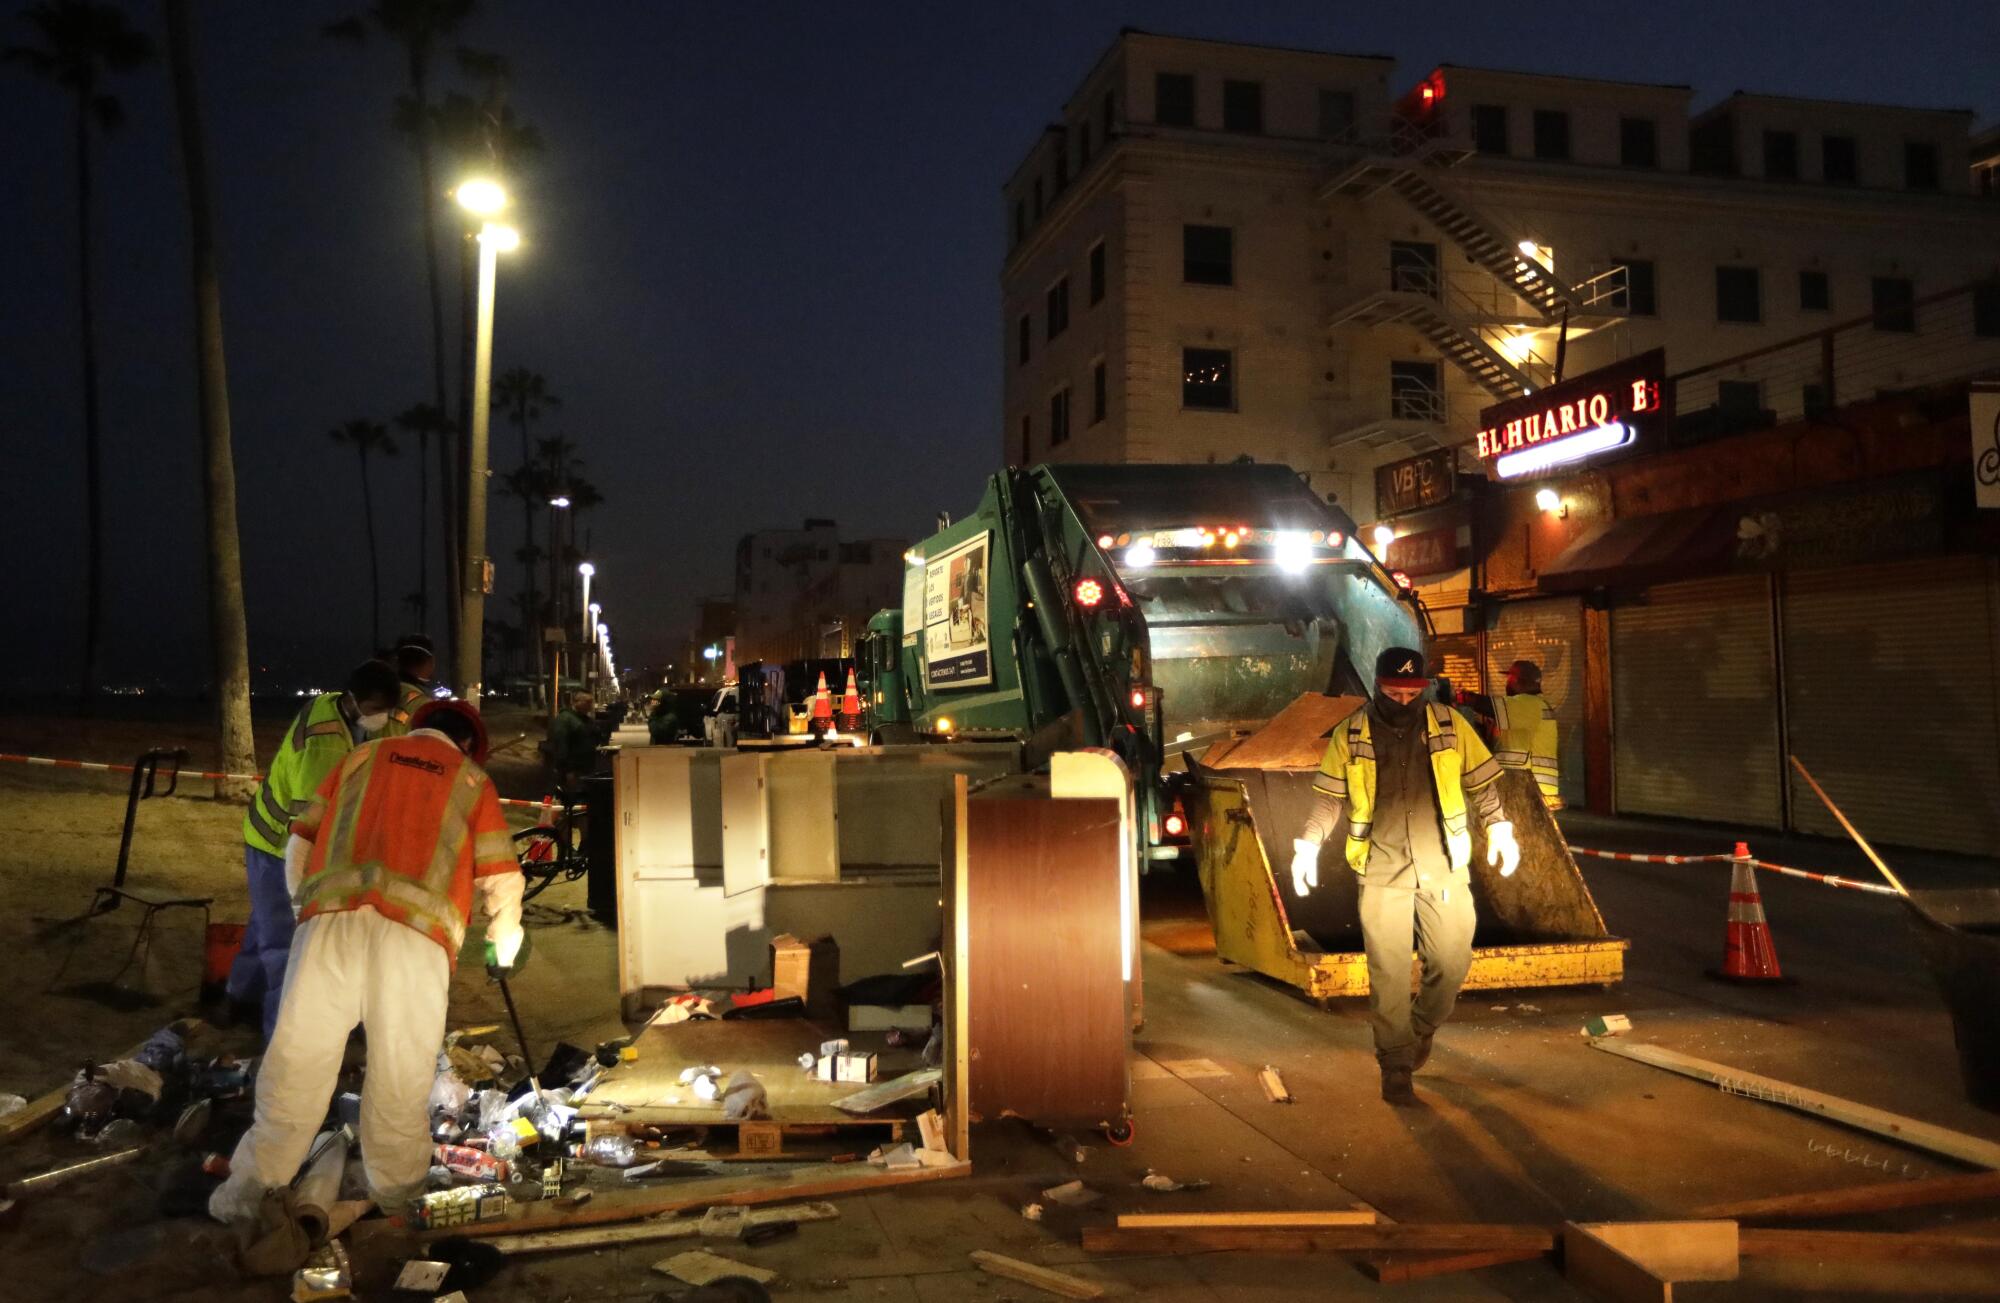 Sanitation workers clear a homeless encampment along Ocean Front Walk in Venice.